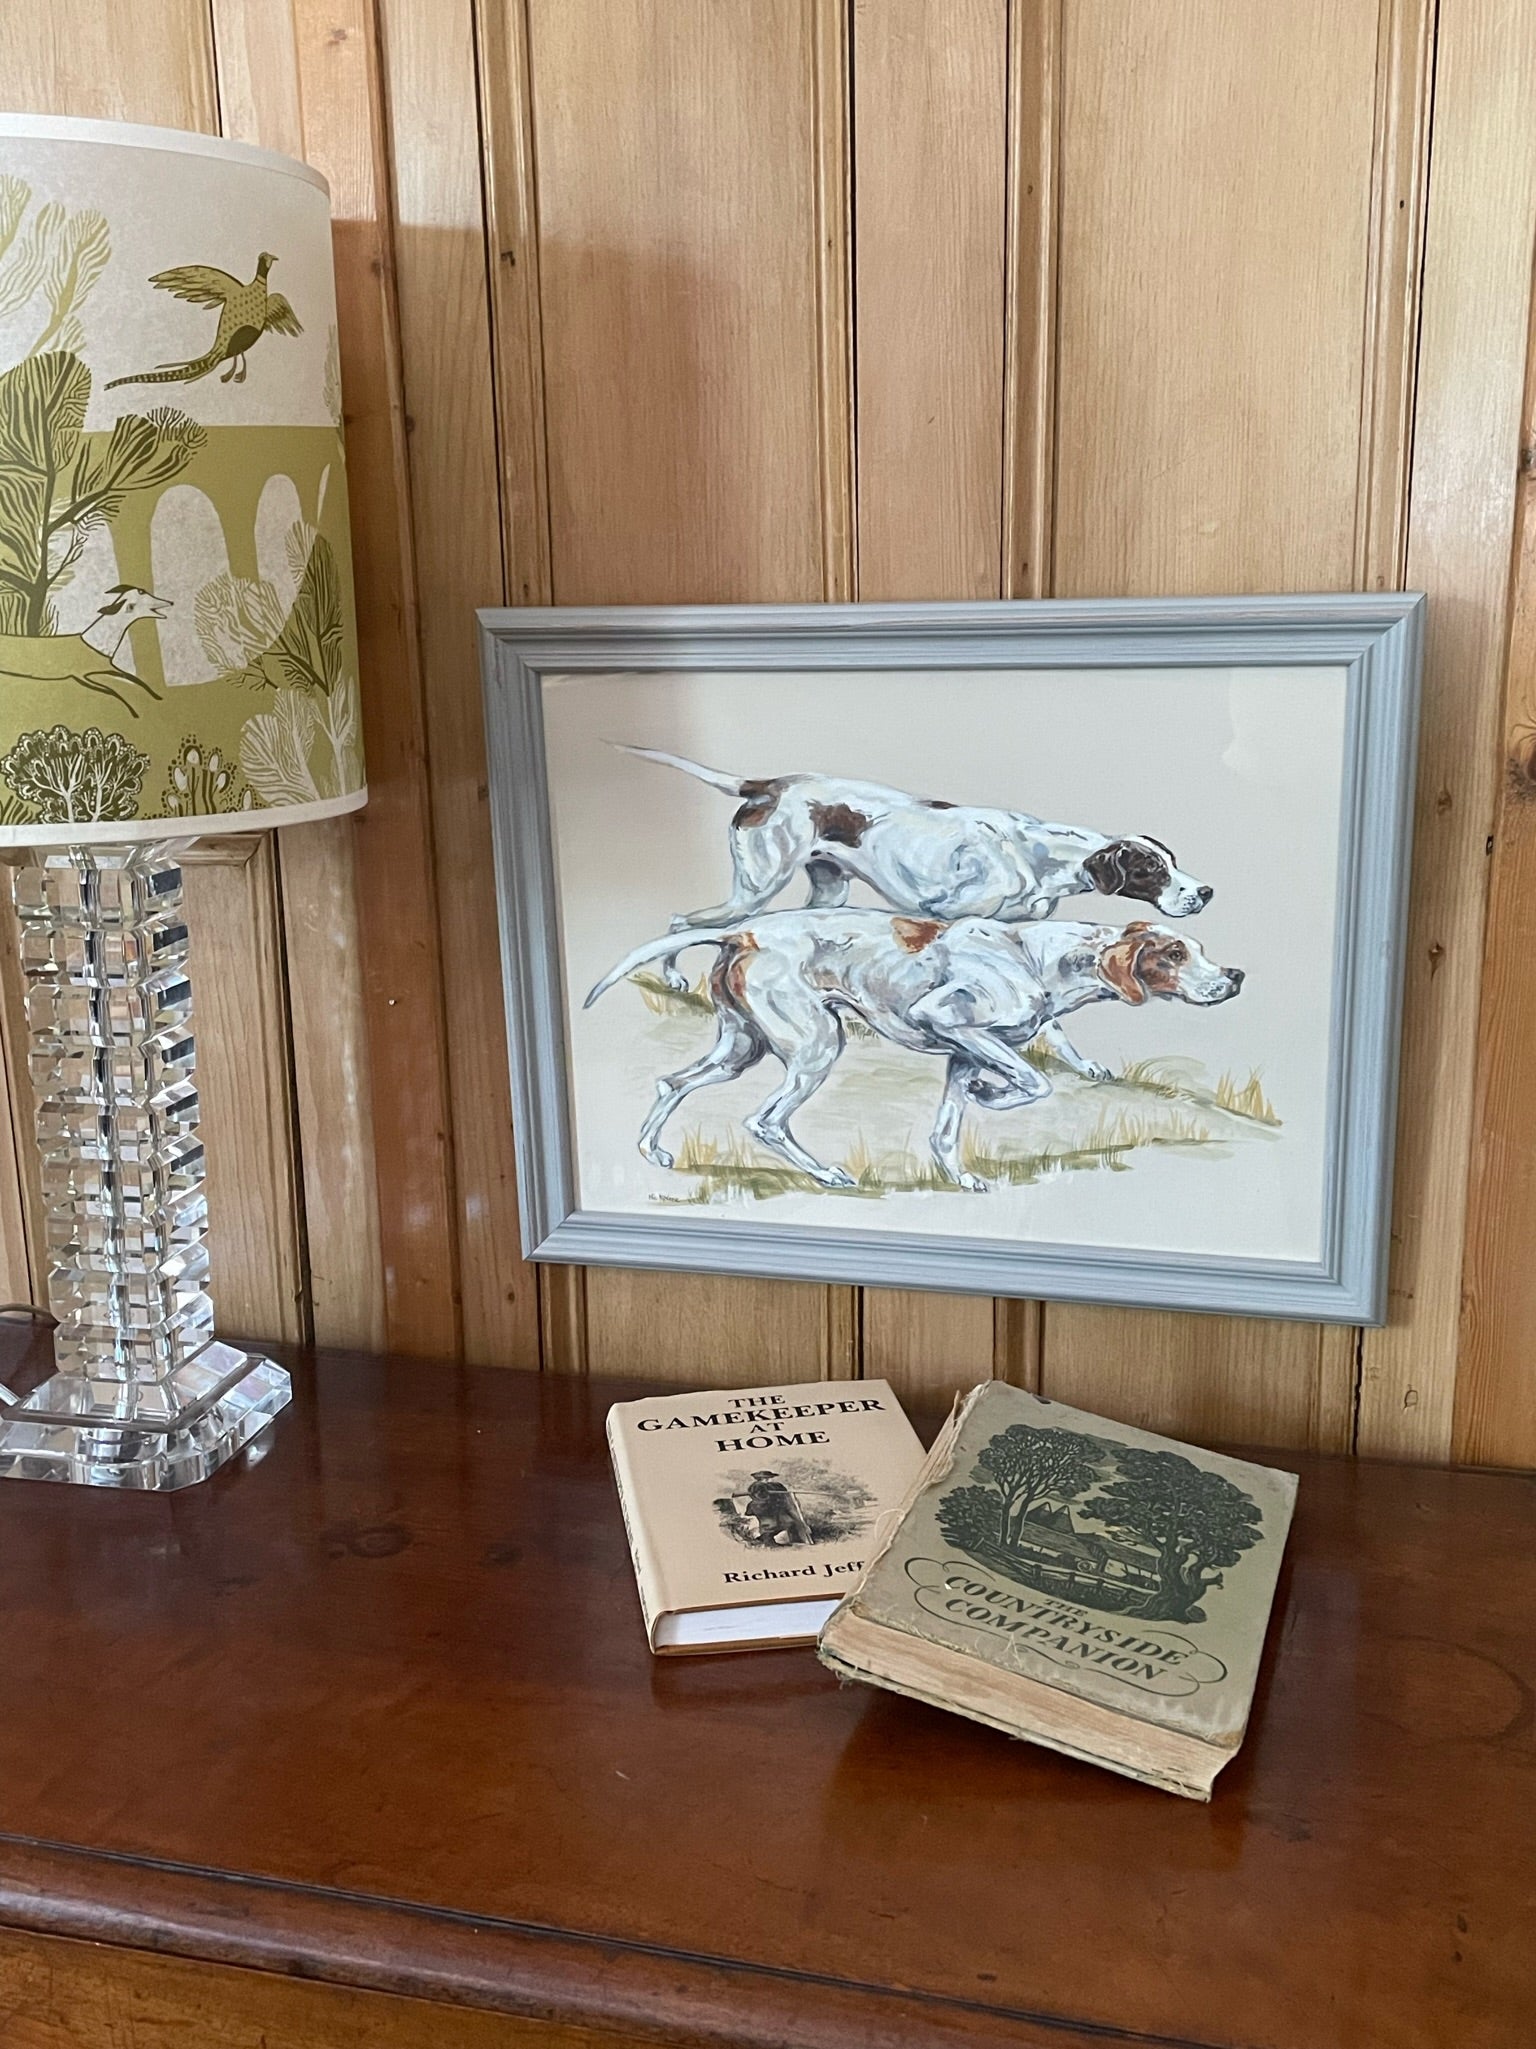 English Pointers -  two traditional gundogs hunting.  A painting of a working dog breed inspired by old country sporting prints.